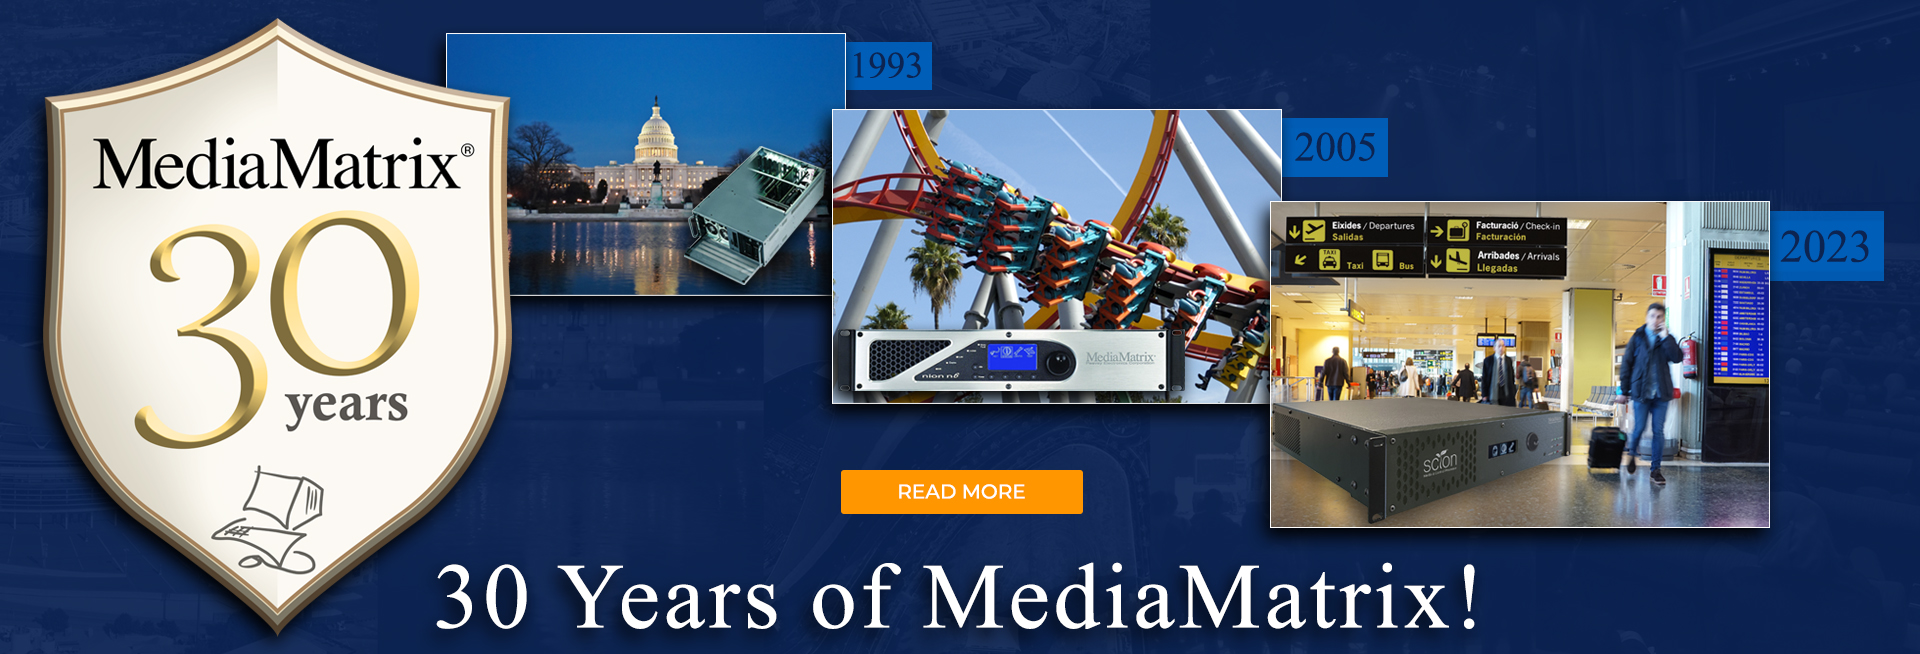 MediaMatrix Marks 30 Years of Excellence